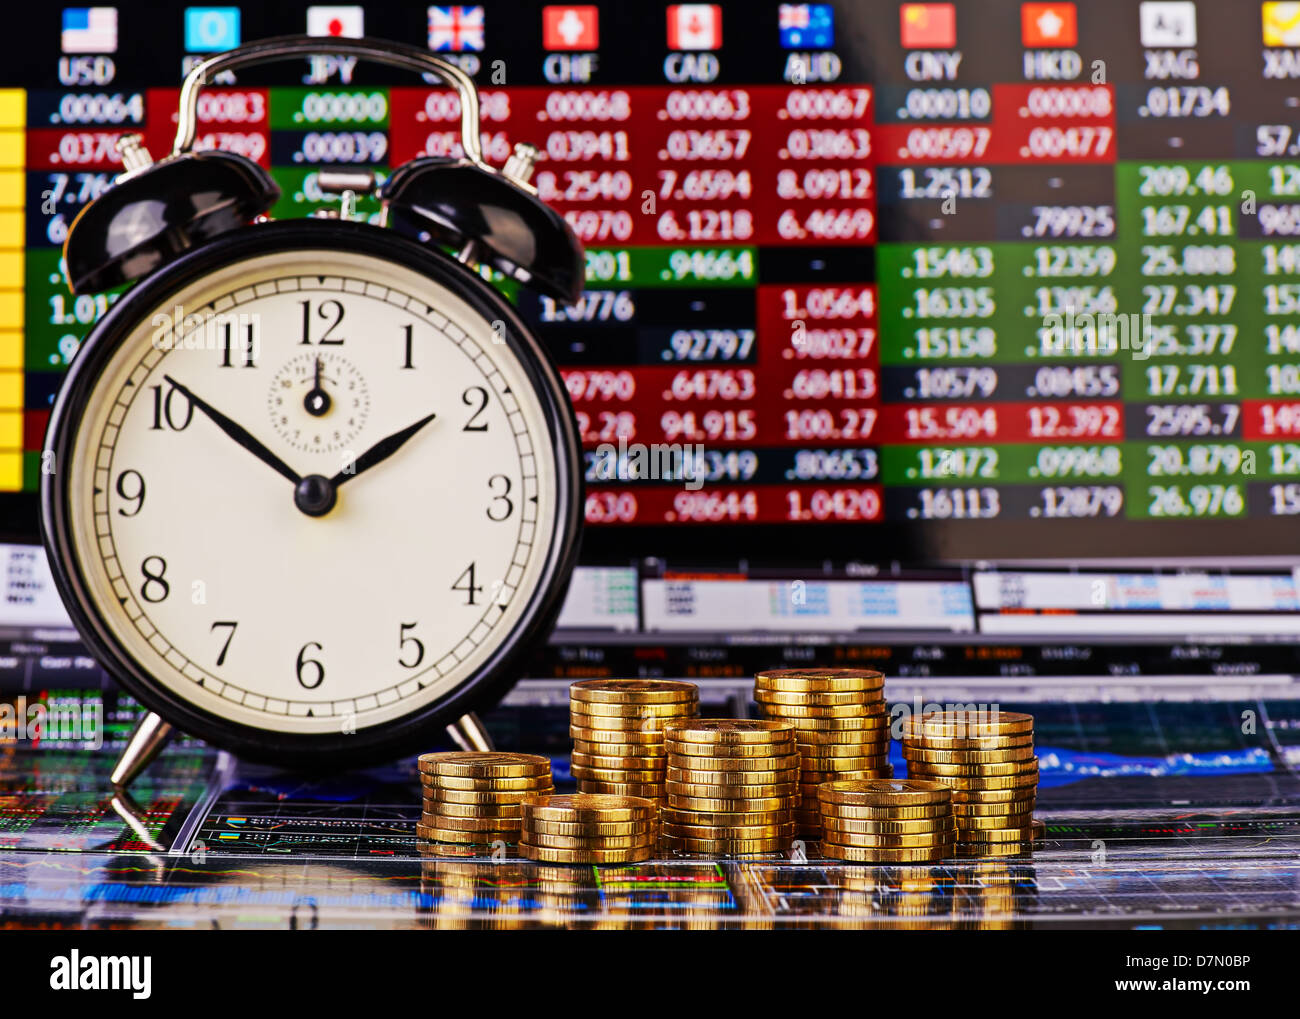 Stacks of golden coins, clock and the financial chart as background. Selective focus Stock Photo